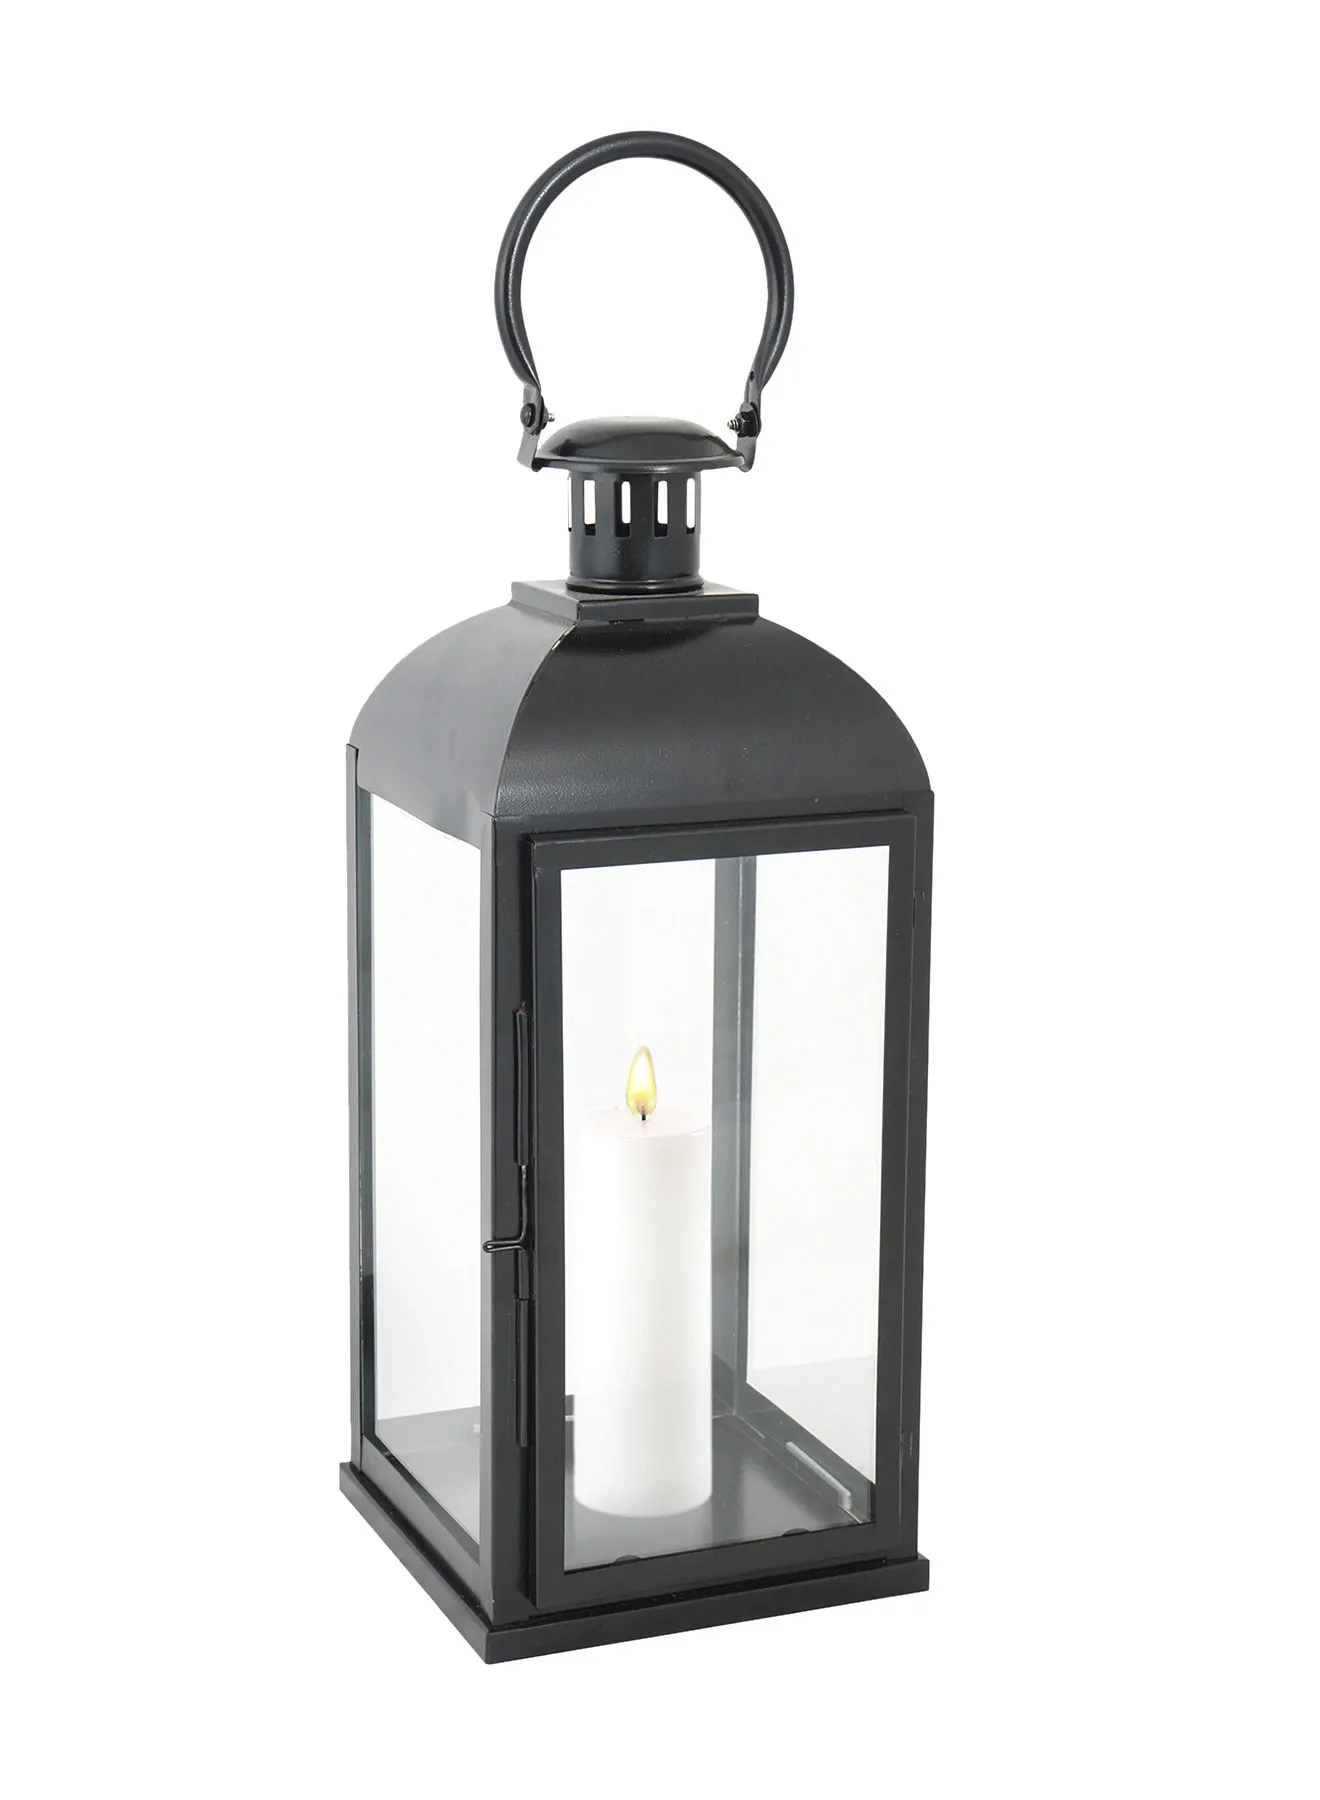 ebb & flow Modern Ramadan Candle Lantern With Glass Unique Luxury Quality Scents For The Perfect Stylish Home Black 16.5 x 16.5 x 40centimeter